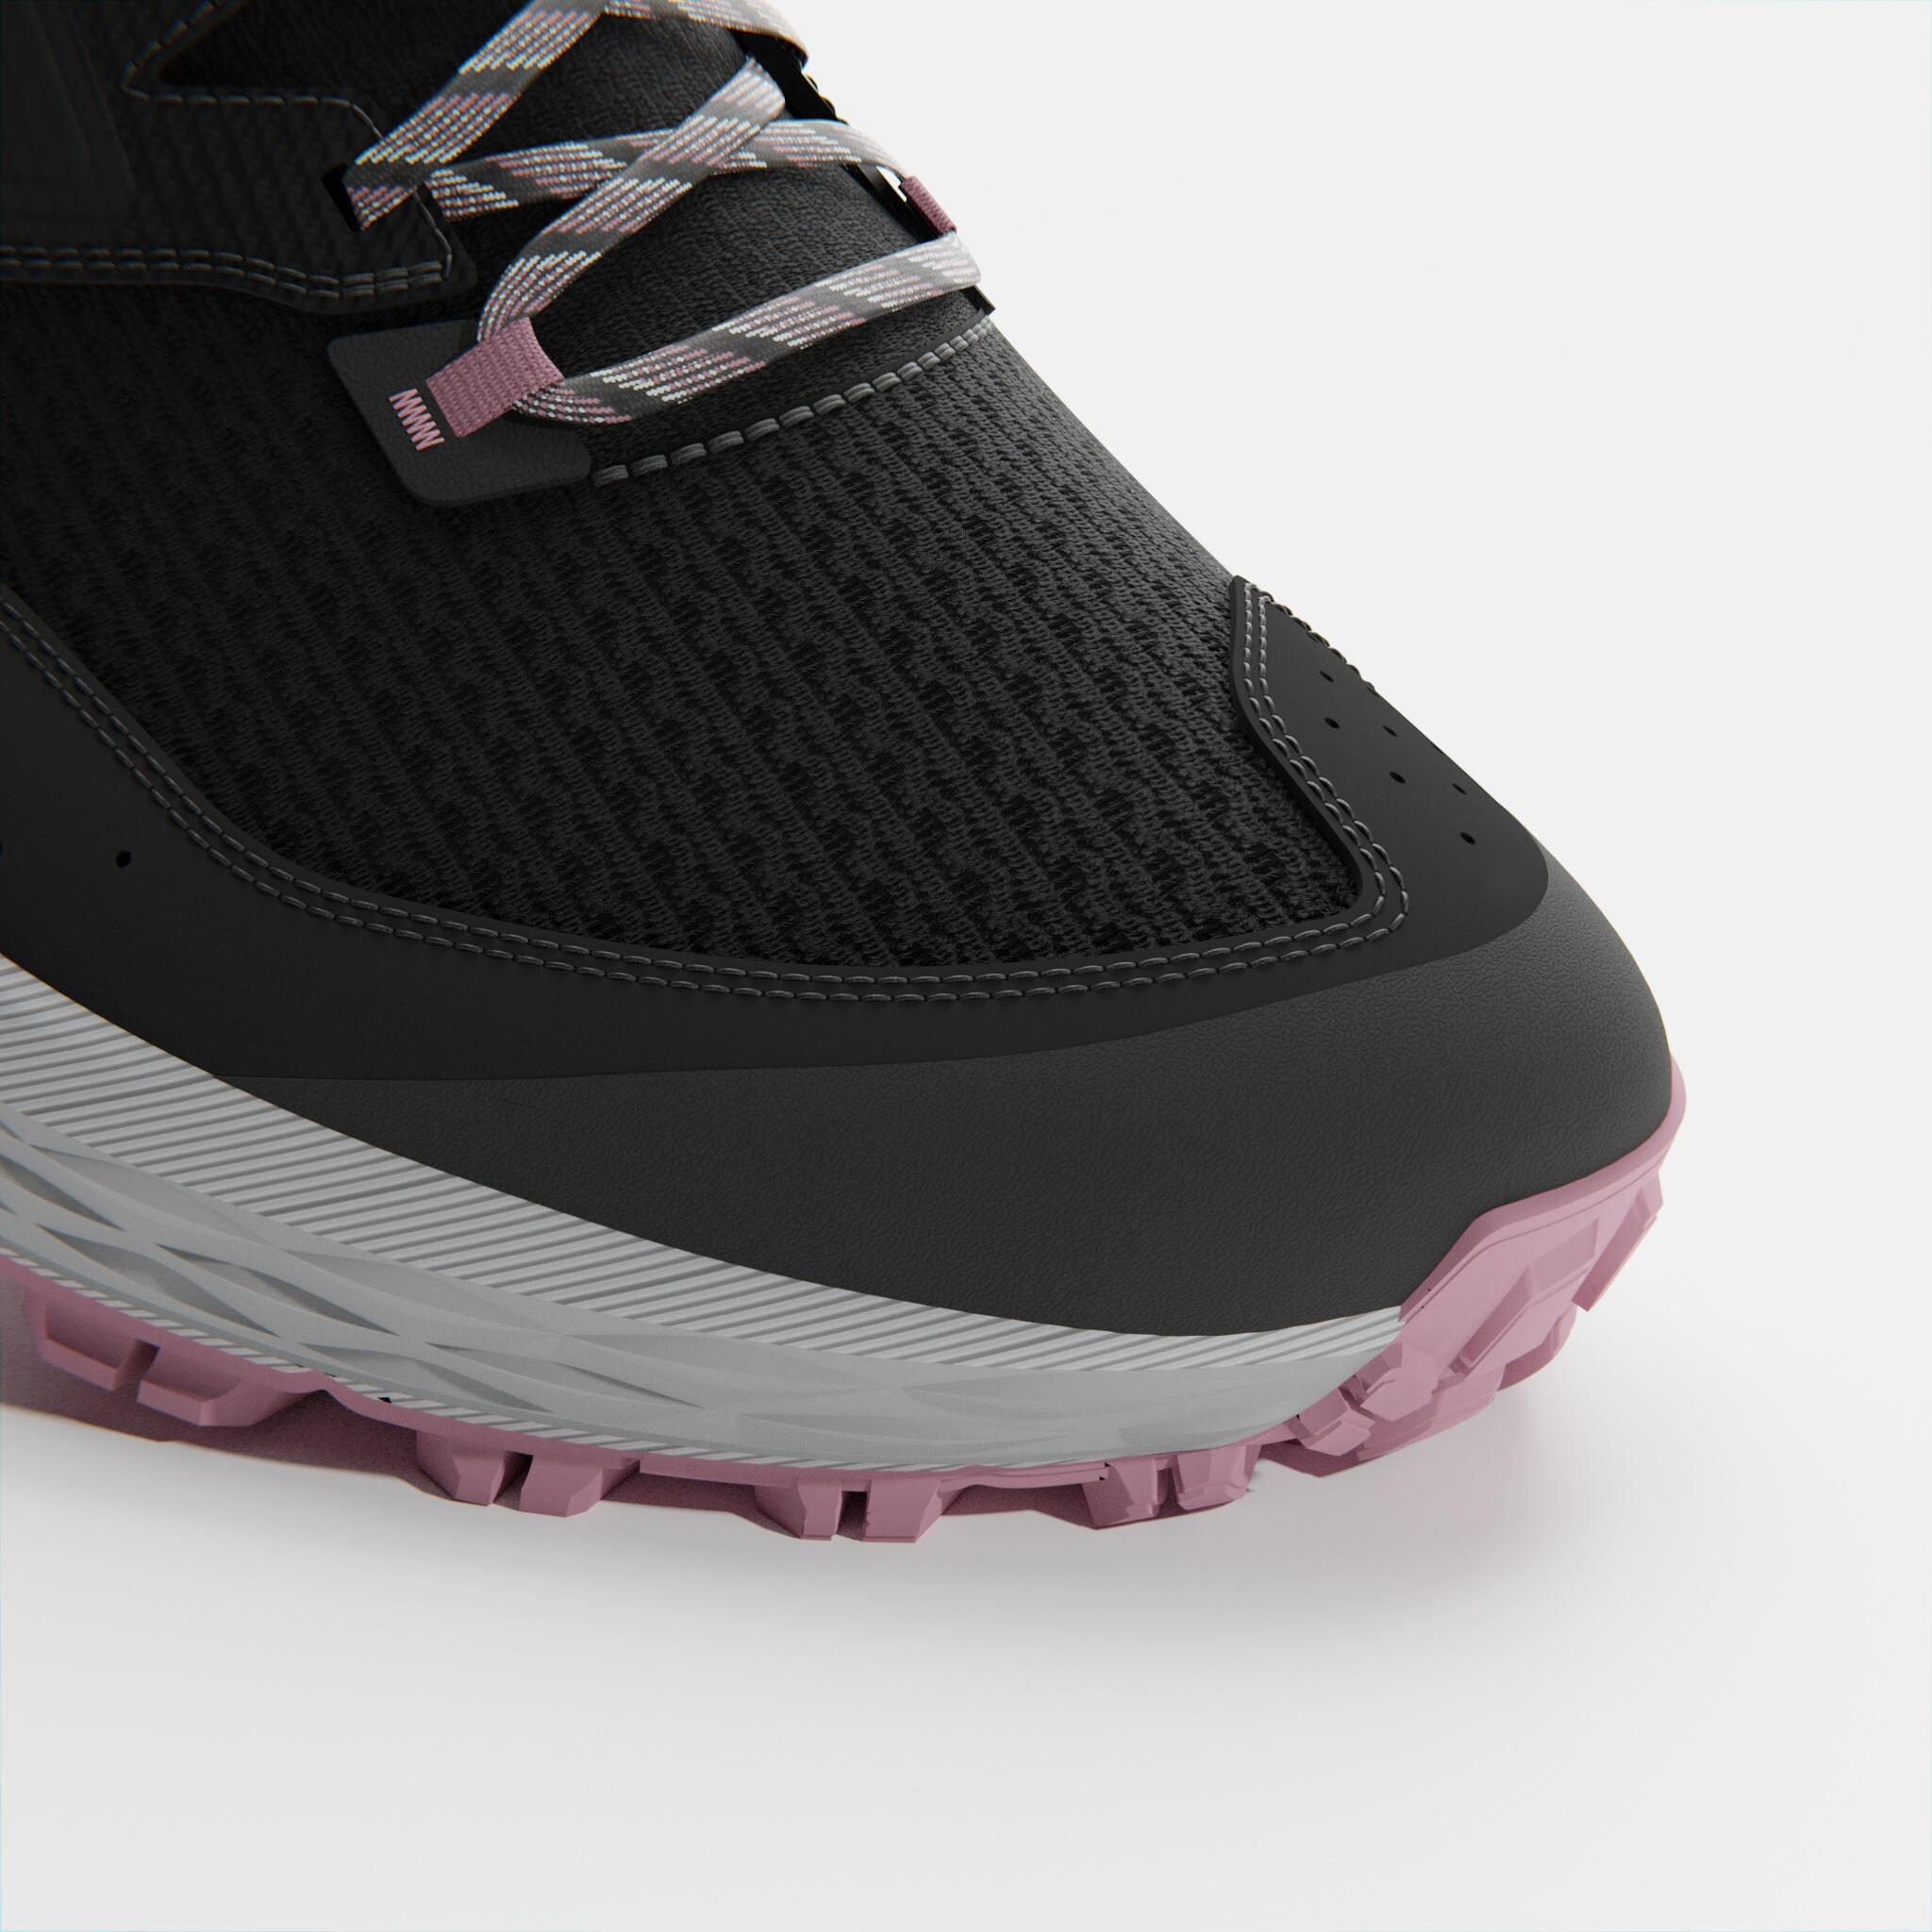 WOMEN's TRAIL RUNNING SHOES TR2 - carbon grey button/pink 5/8